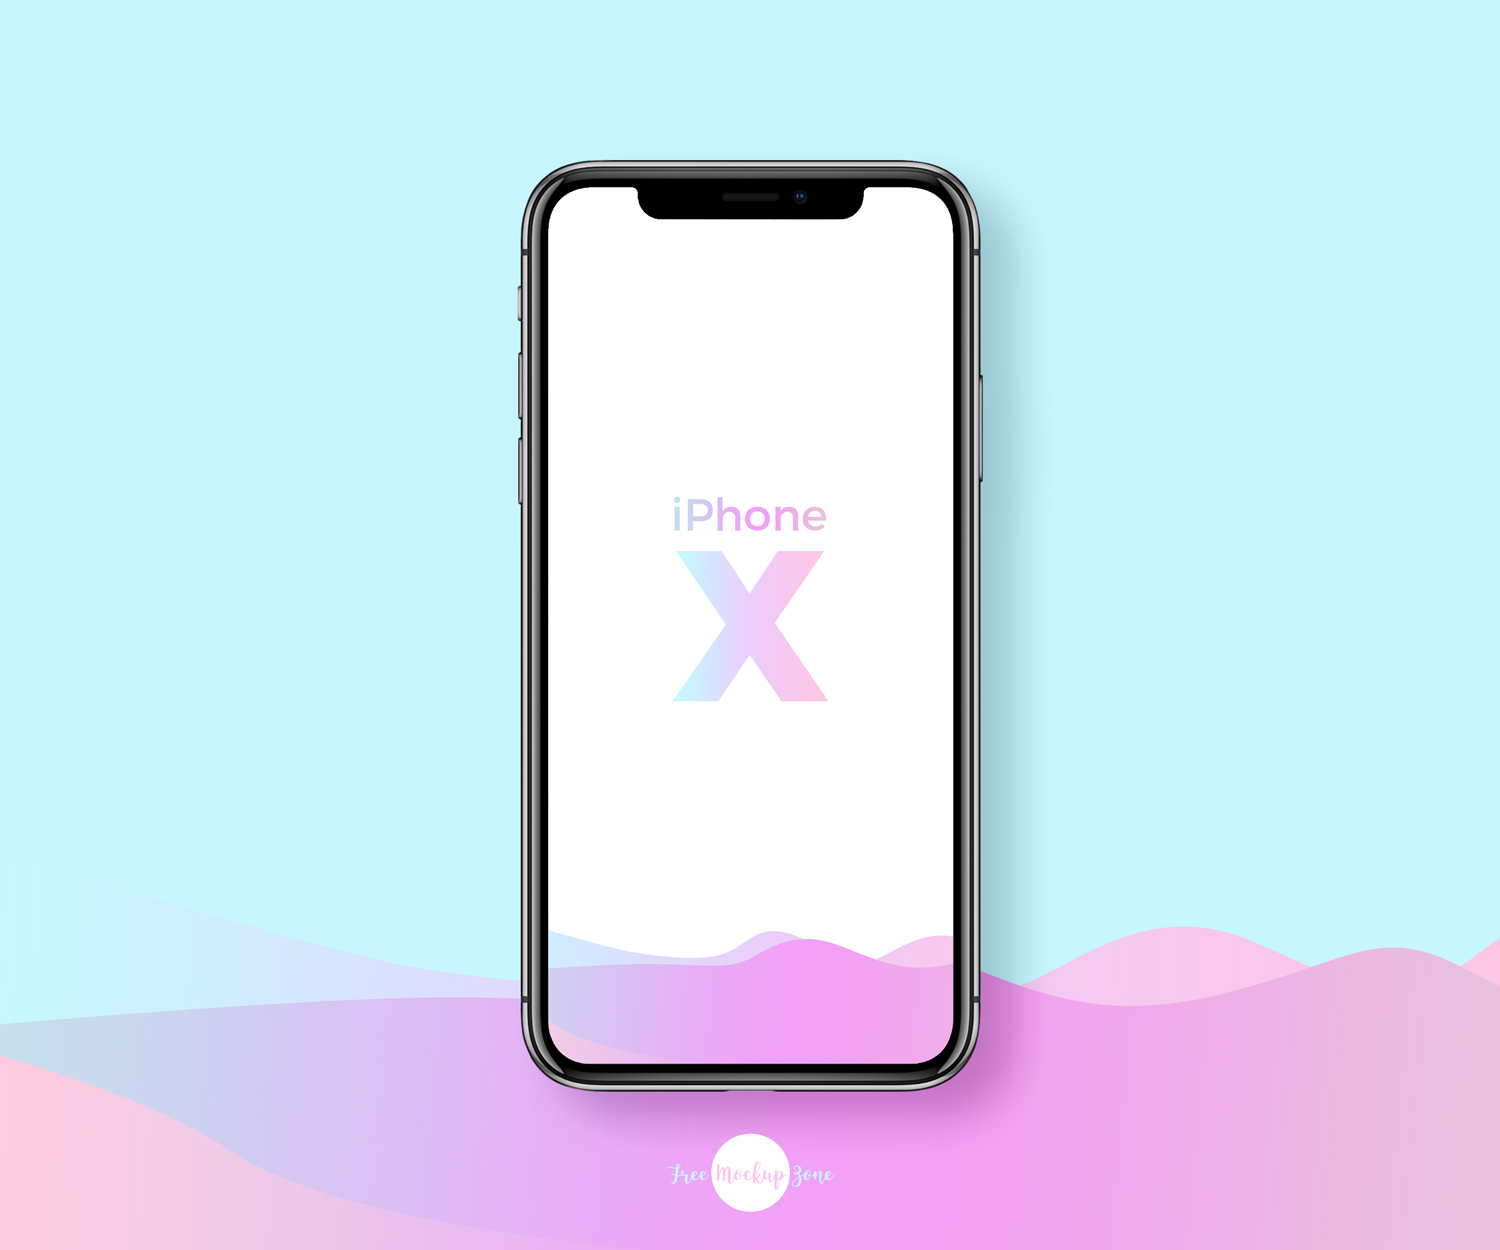 Download Free Front Screen iPhone X Mockup PSD 2018Free Mockup Zone